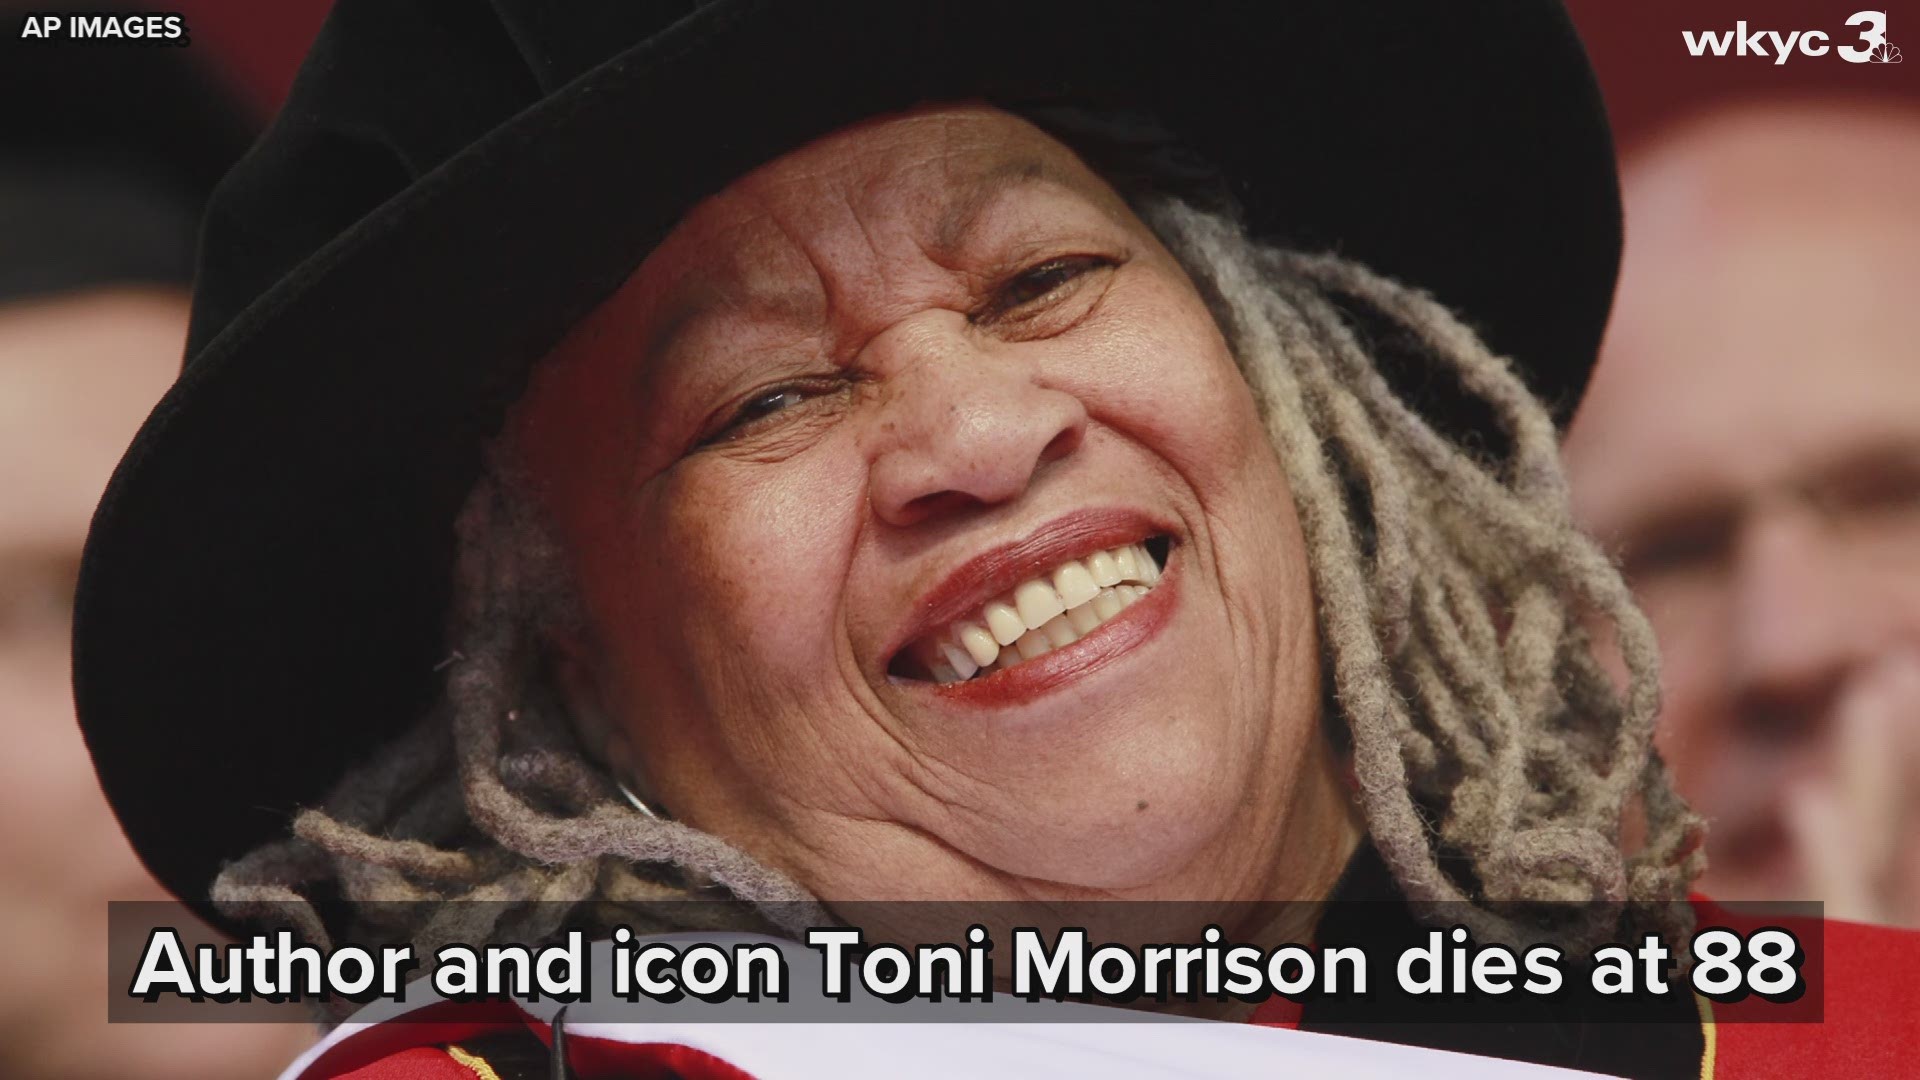 Morrison broke barriers when she became the first black woman to win a Nobel Prize in Literature in 1993.